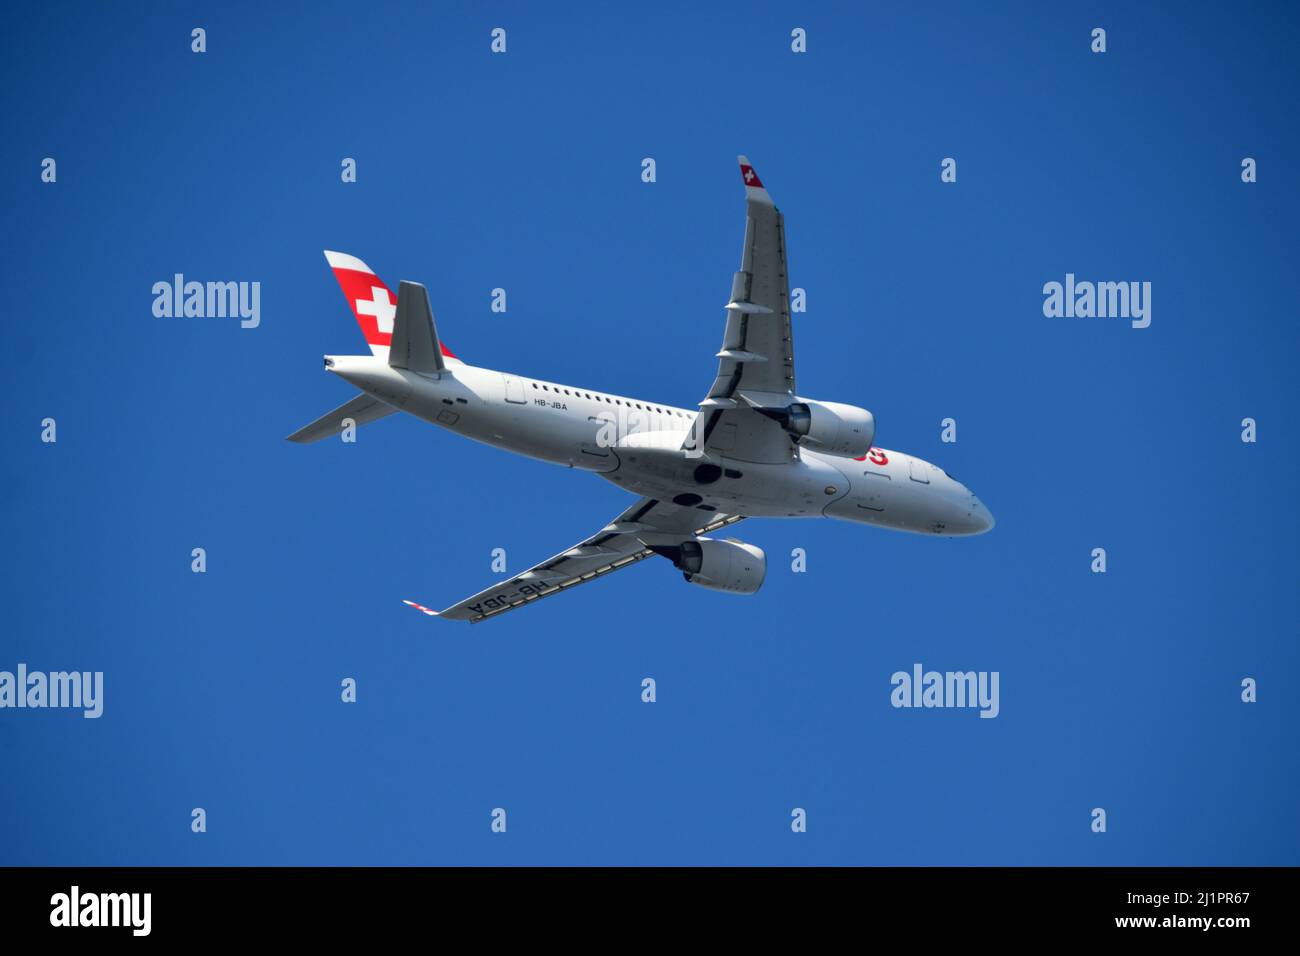 Swiss International Air Lines Airbus A220 HB-JBA seen departing London City Airport on a bright sunny day Stock Photo